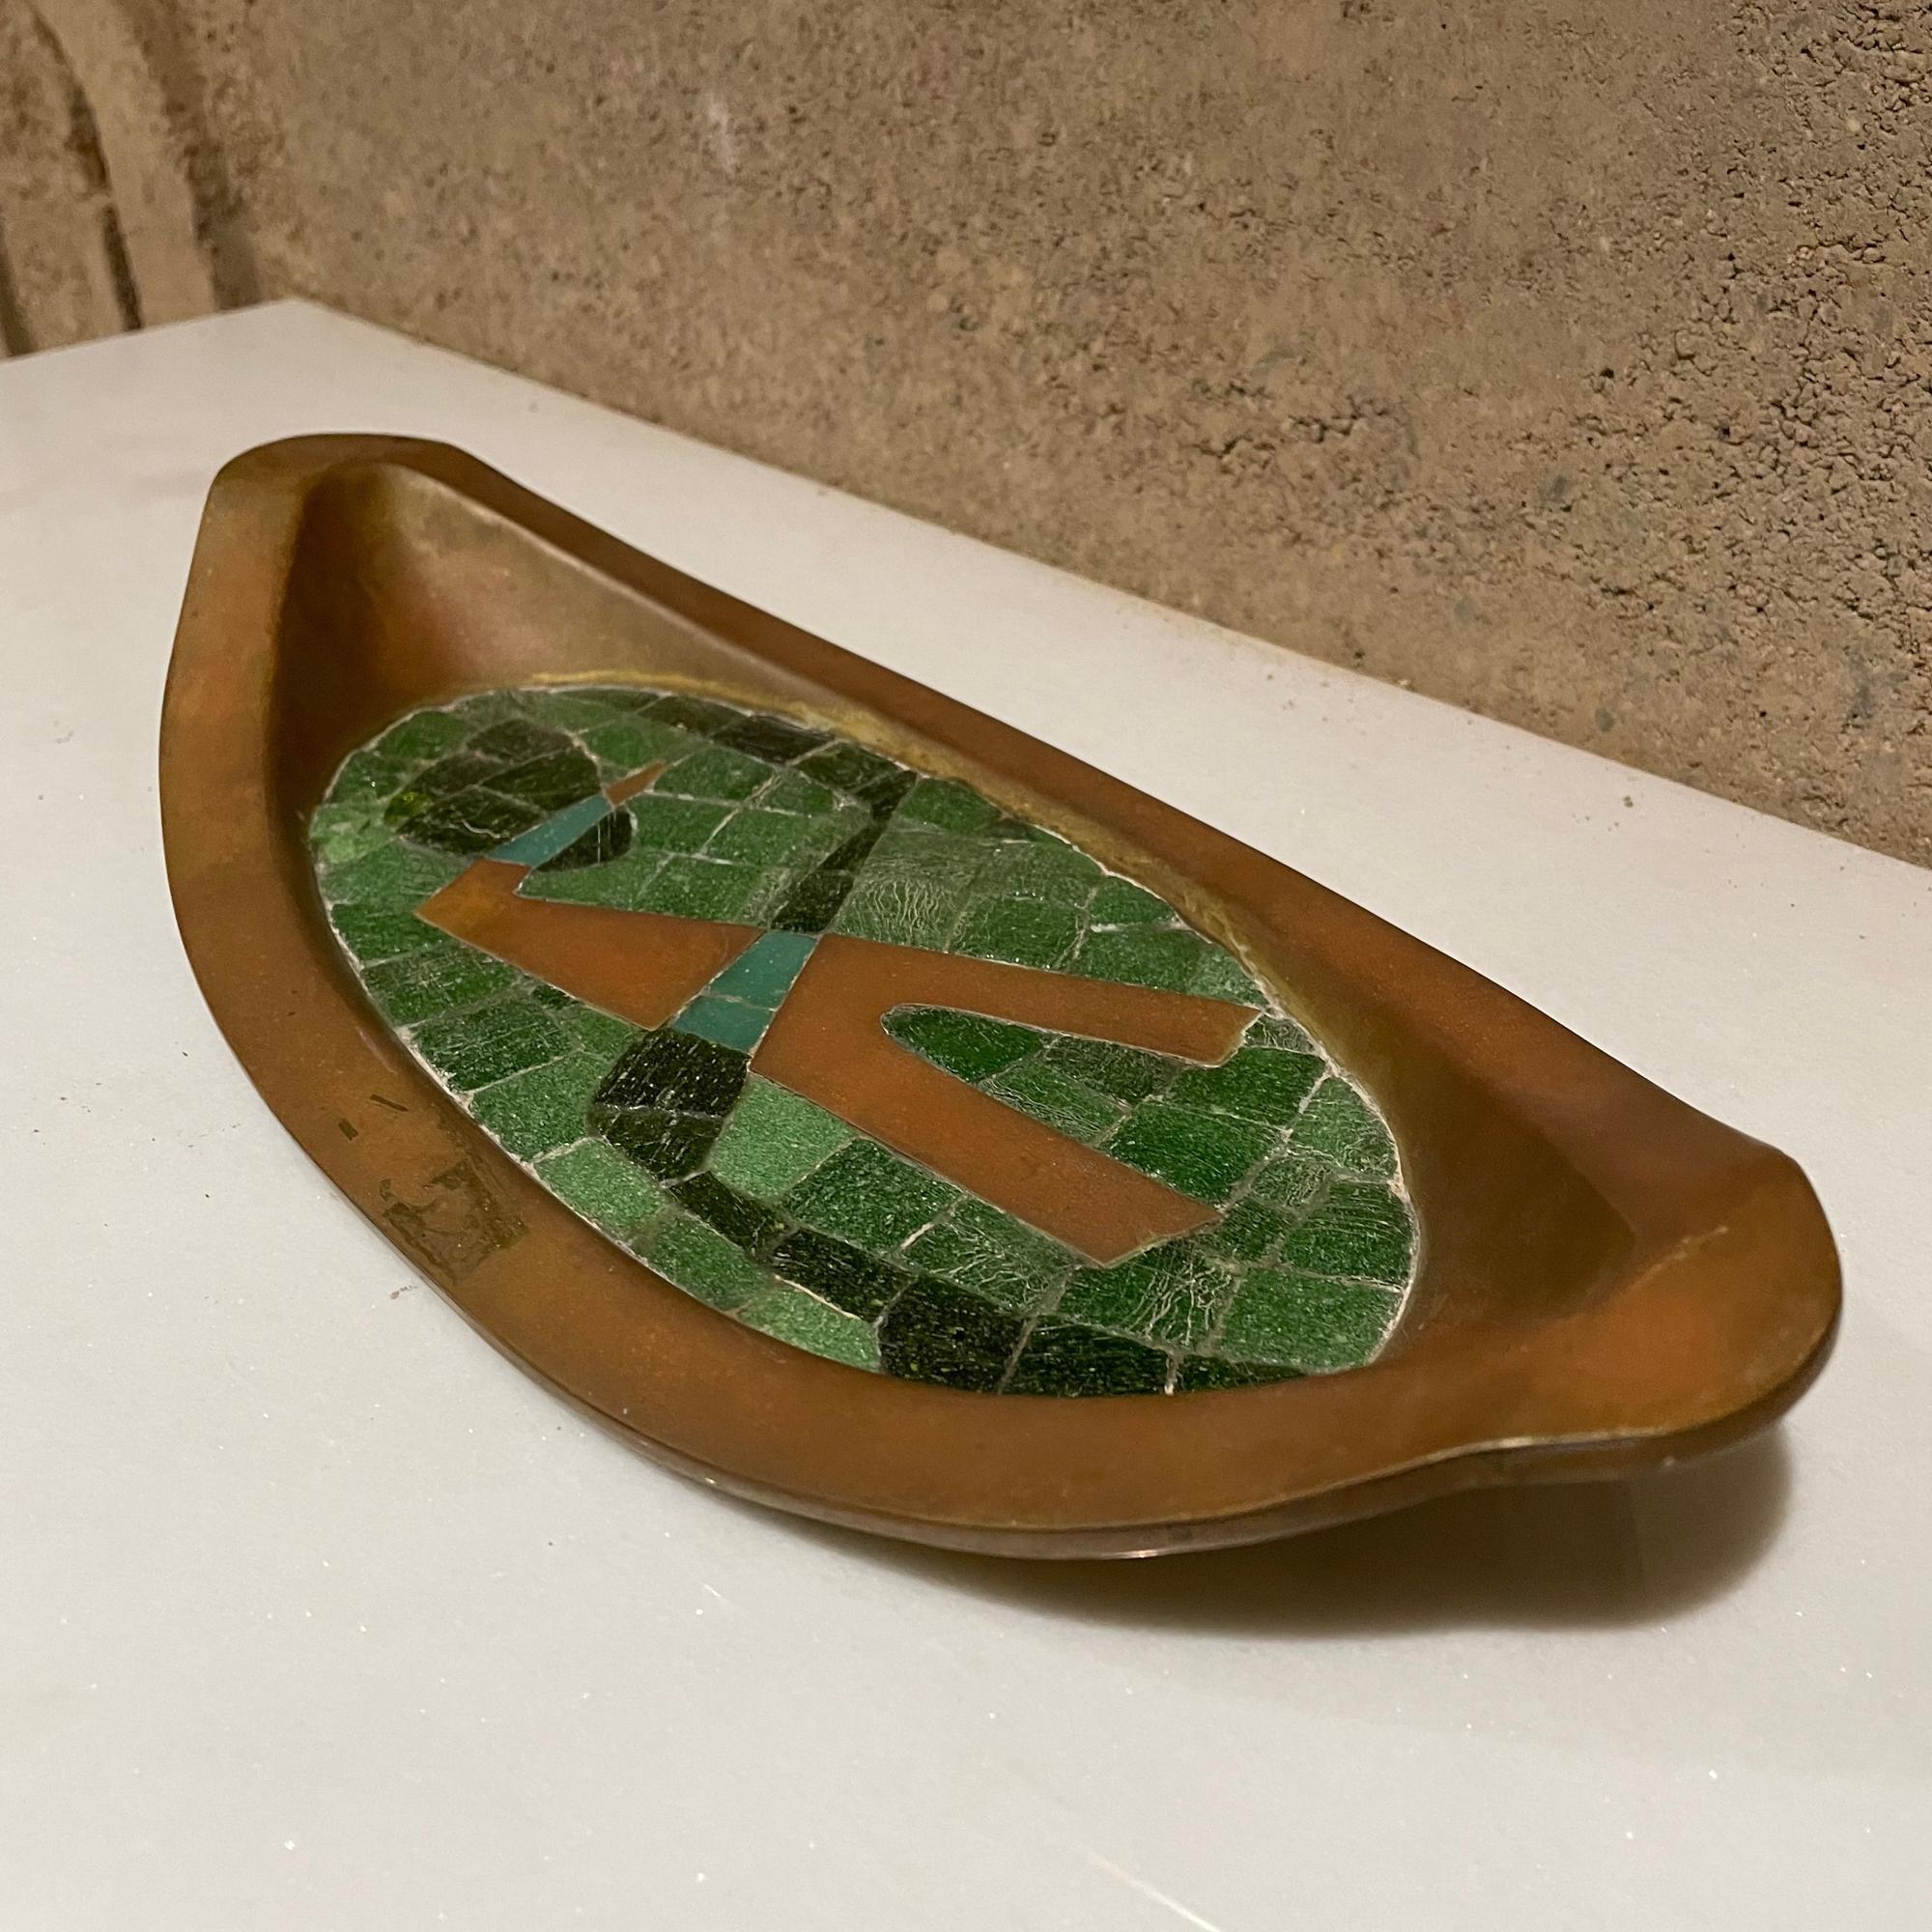 Wall Art Tile Tray by Salvador Teran
Brass and Mosaic Jade Green Stone Decorative Tray - Handwrought Wall Art Plaque by Salvador Teran, Mexico 1960s.
Maker stamp present.
Dimensions: 12.75 L x 5.75W x 1.75 inches H
Preowned Original unrestored